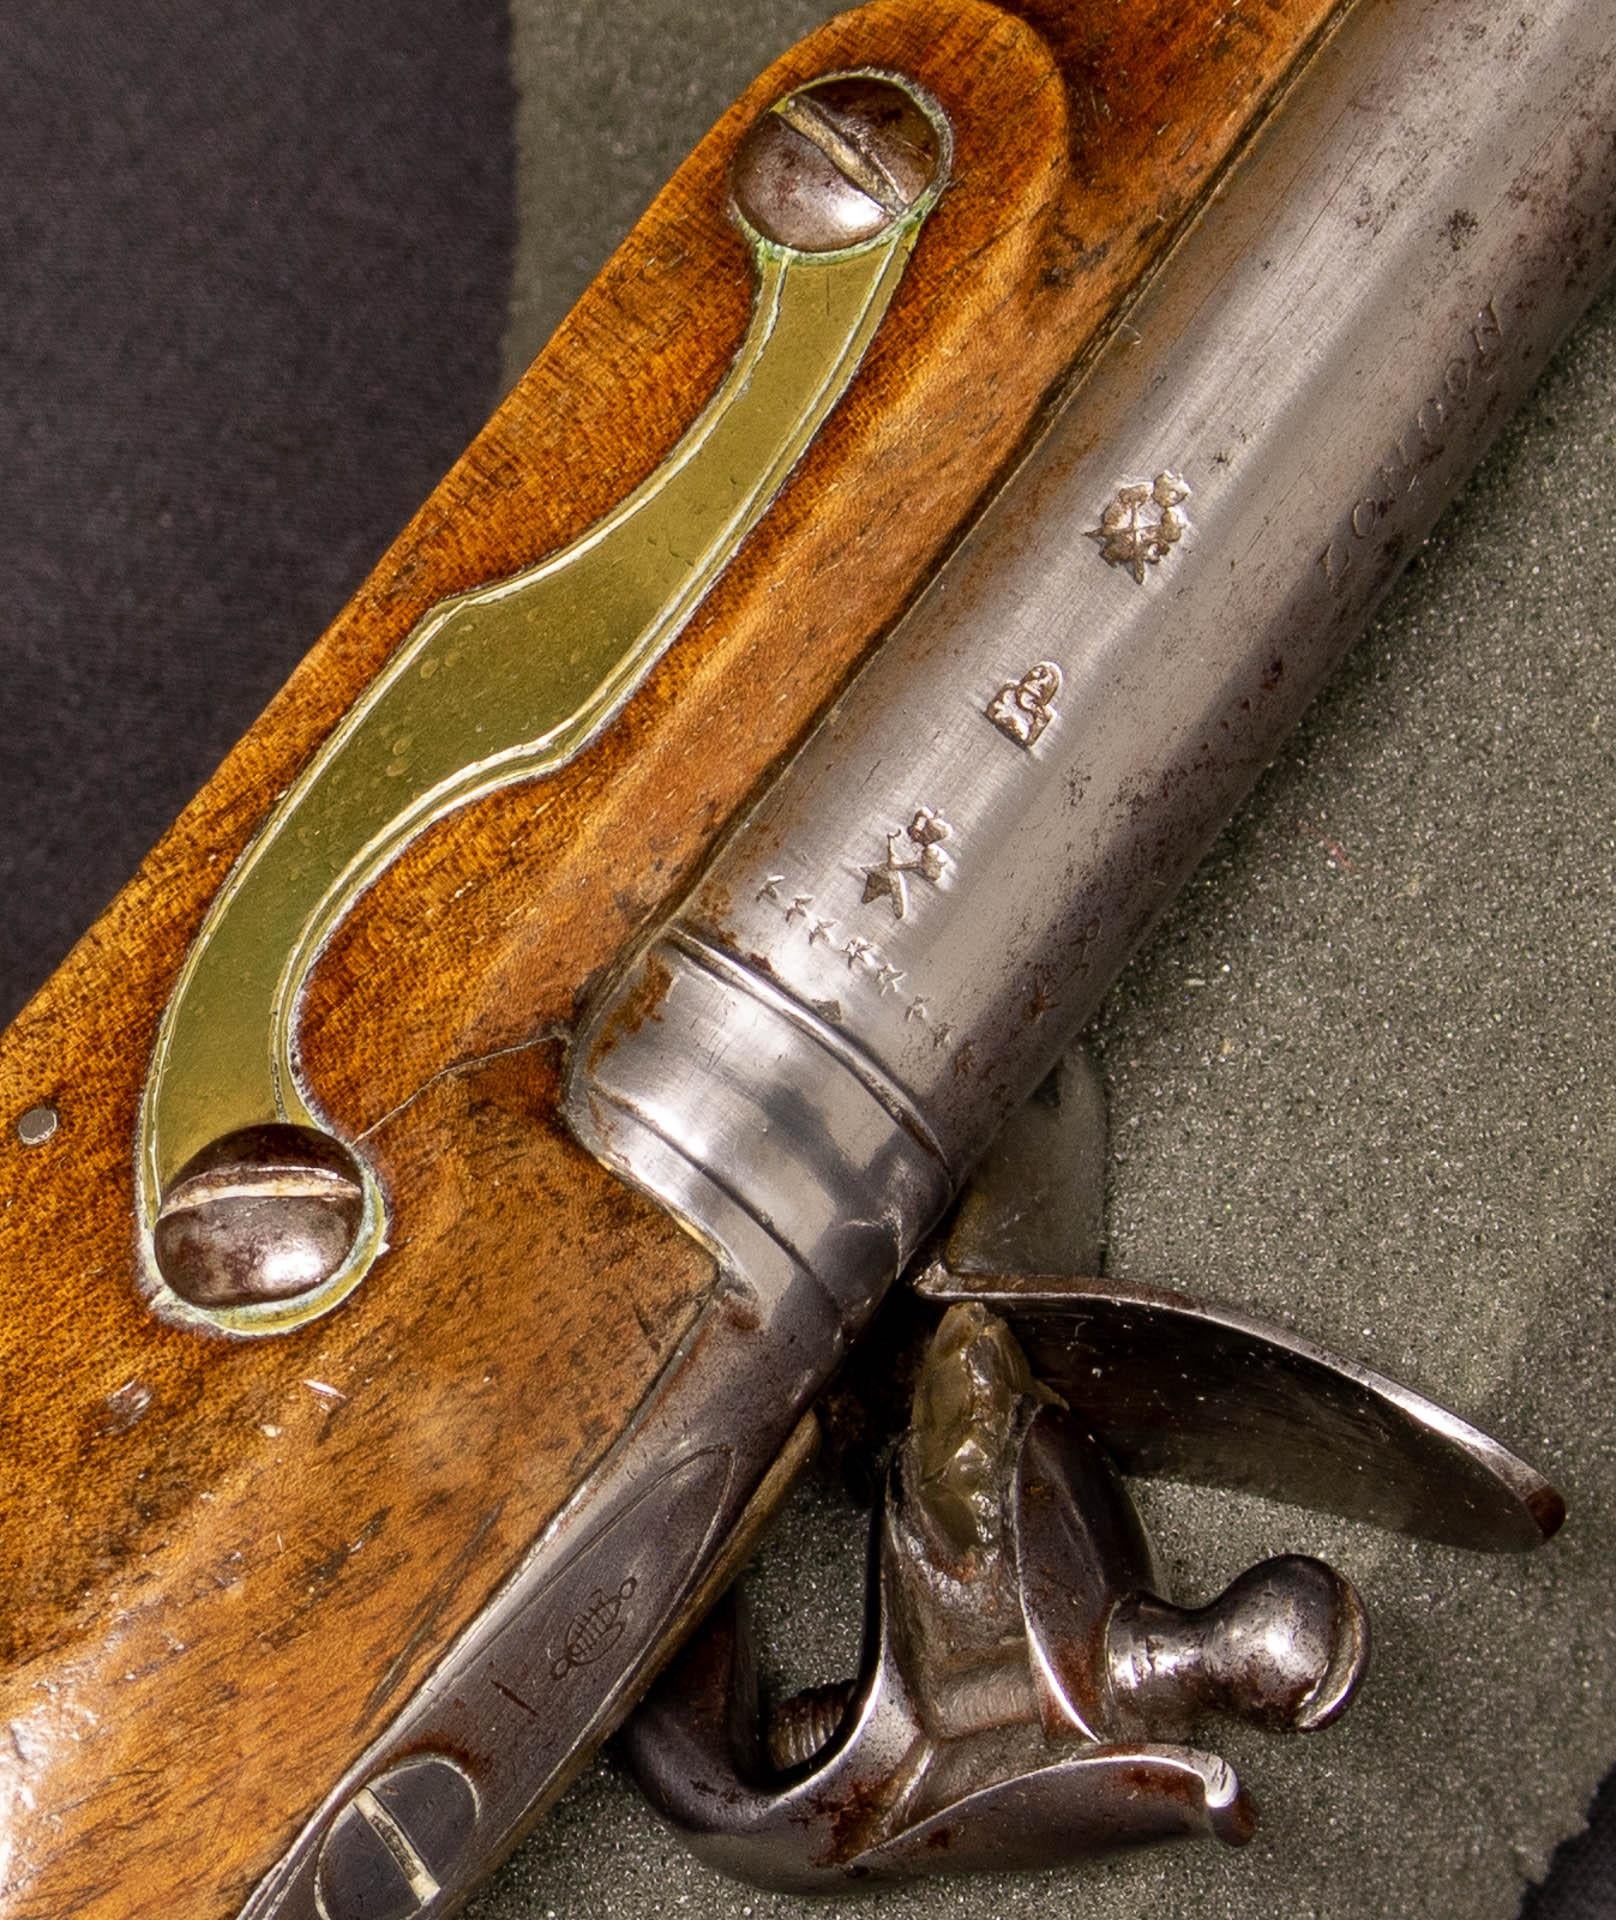 This Revolutionary War period flintlock pistol was made by Thomas Ketland, Sr. a successful firearms maker who was in business under this name from around 1760. He began to export weapons in 1790. The name Ketland continued as W. Ketland under his